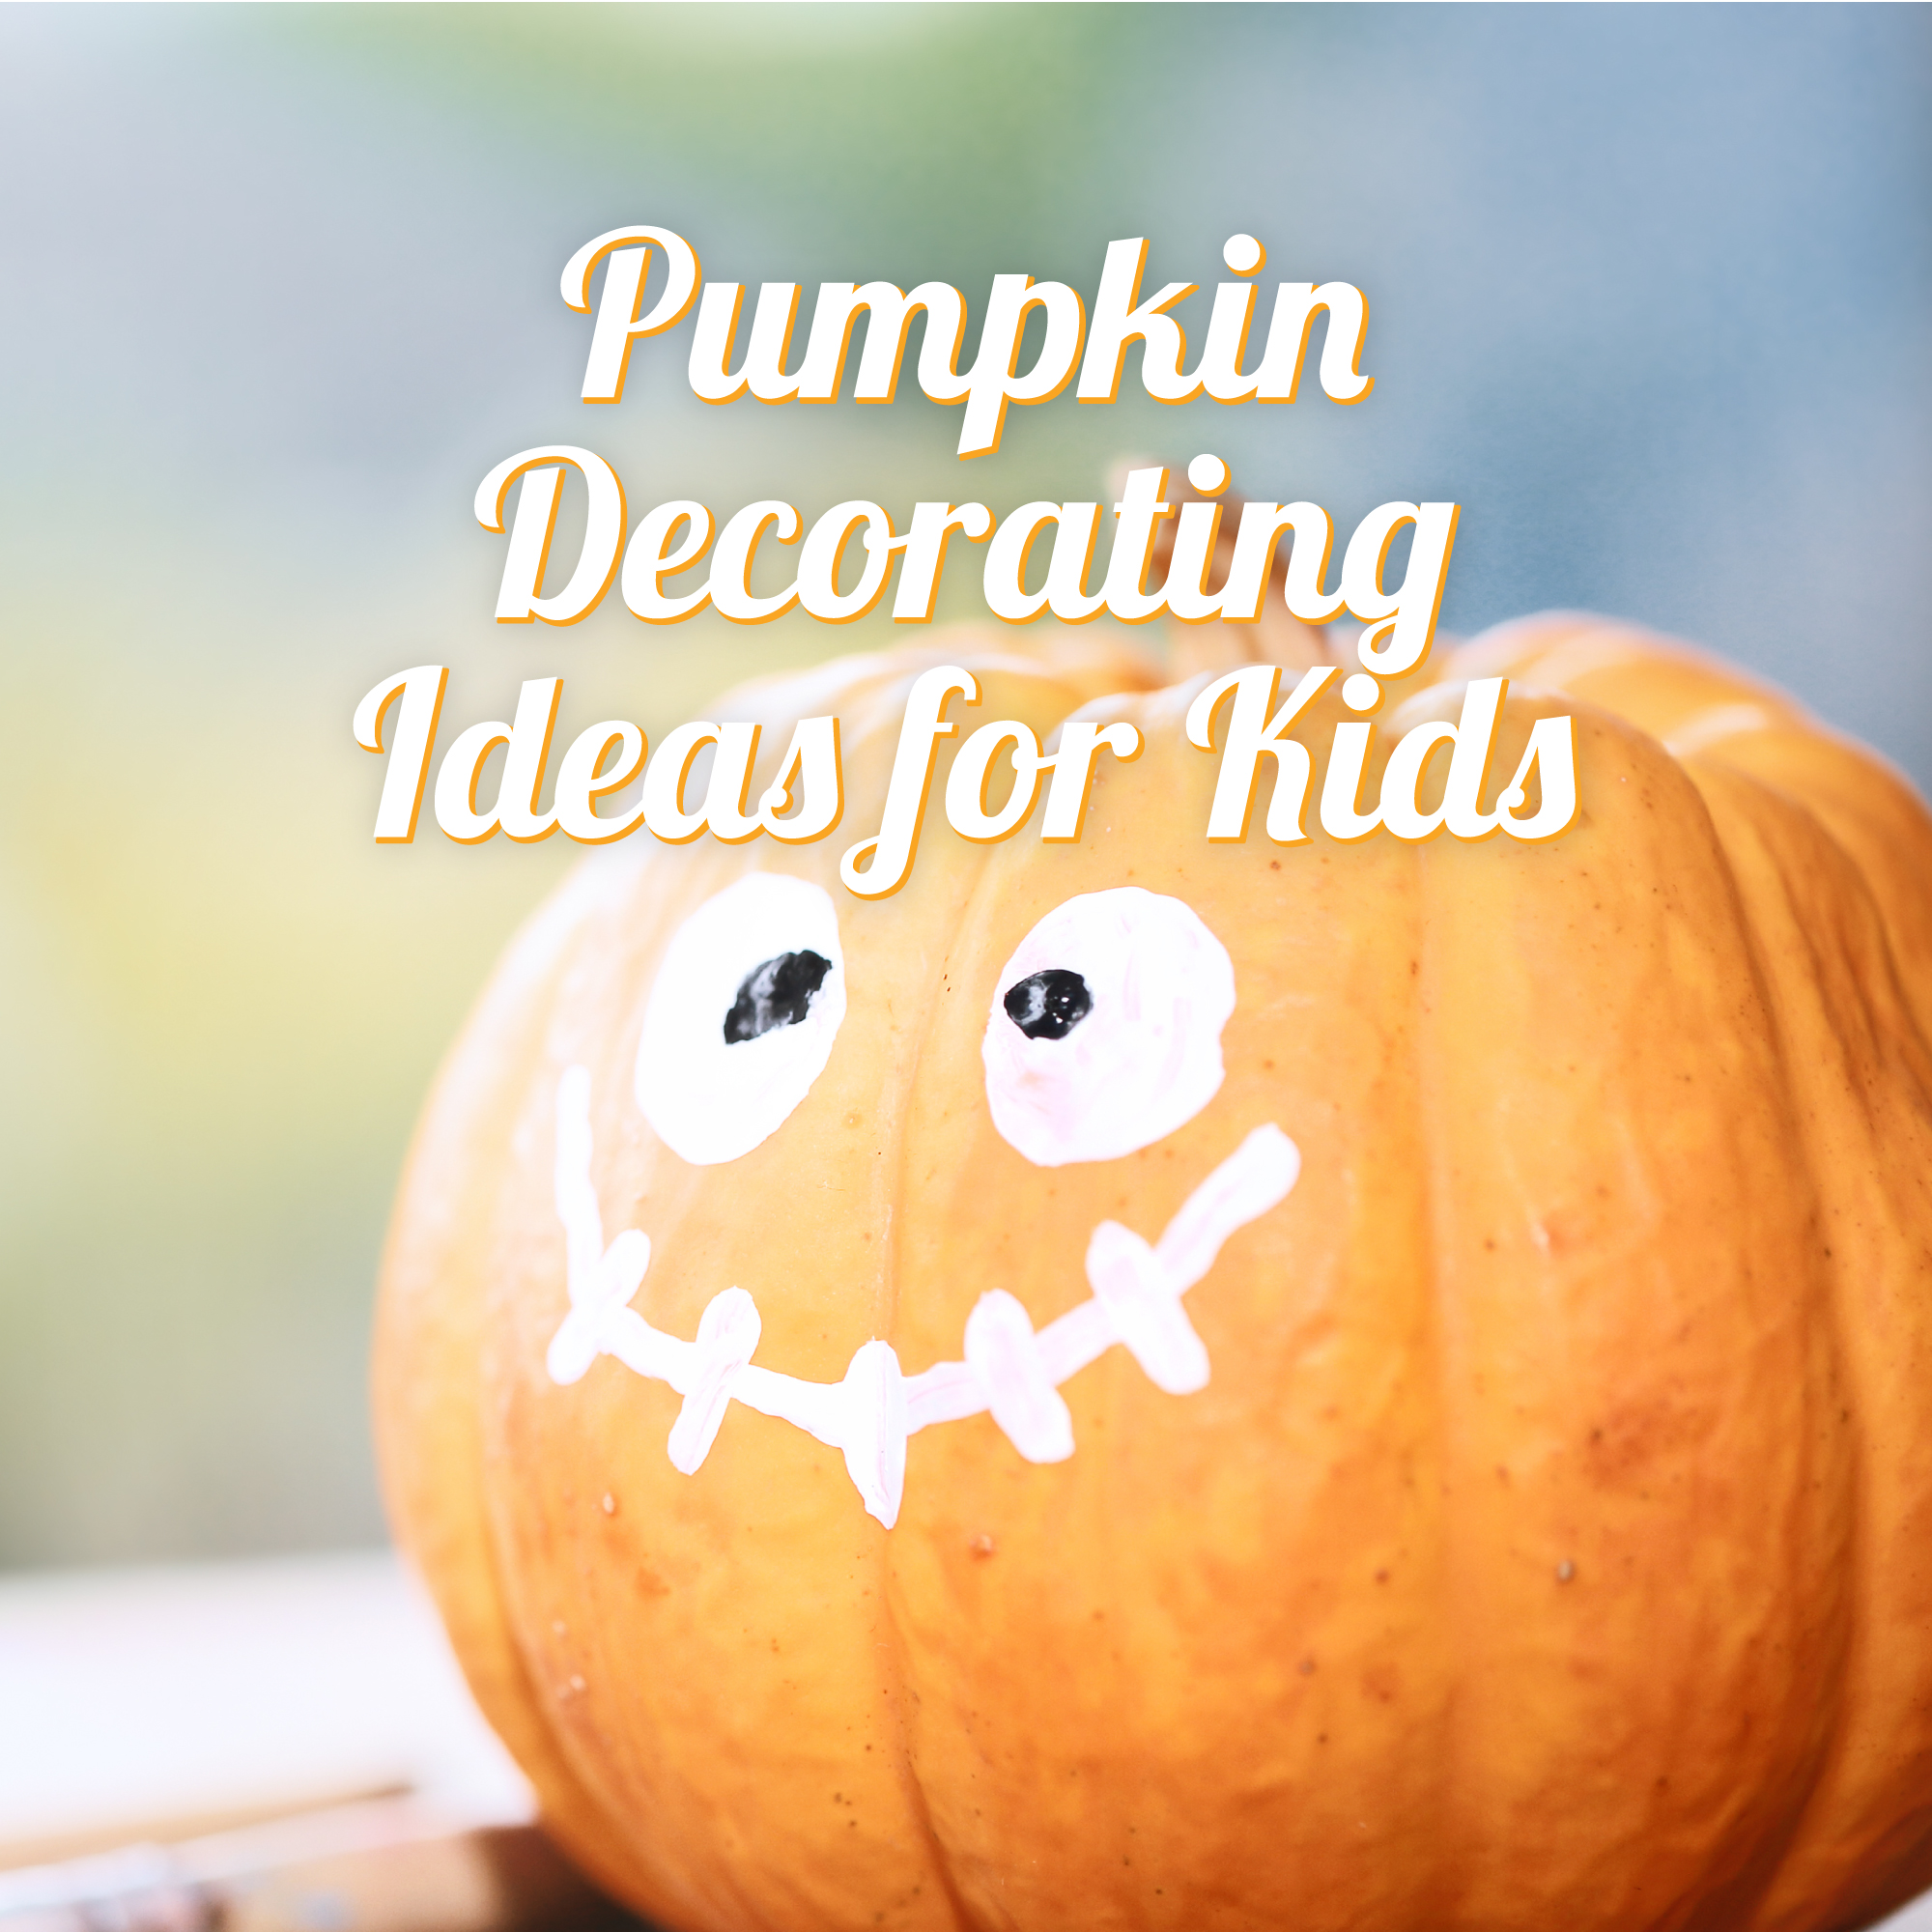 Pumpkin Decorating Ideas for Kids - Country Home Learning Center